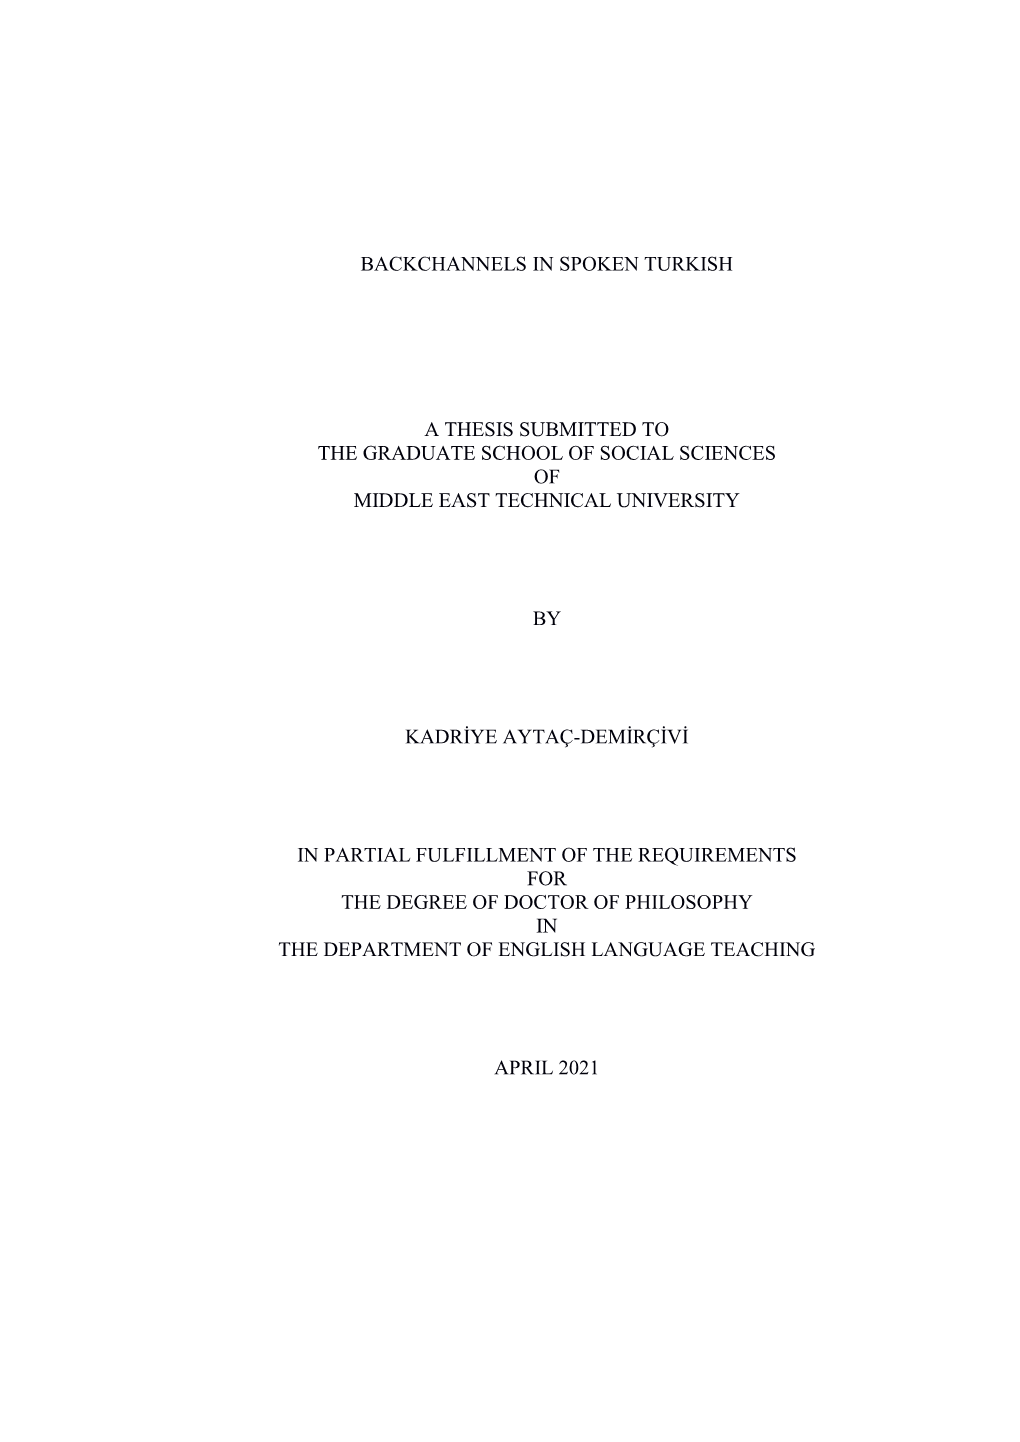 Backchannels in Spoken Turkish a Thesis Submitted